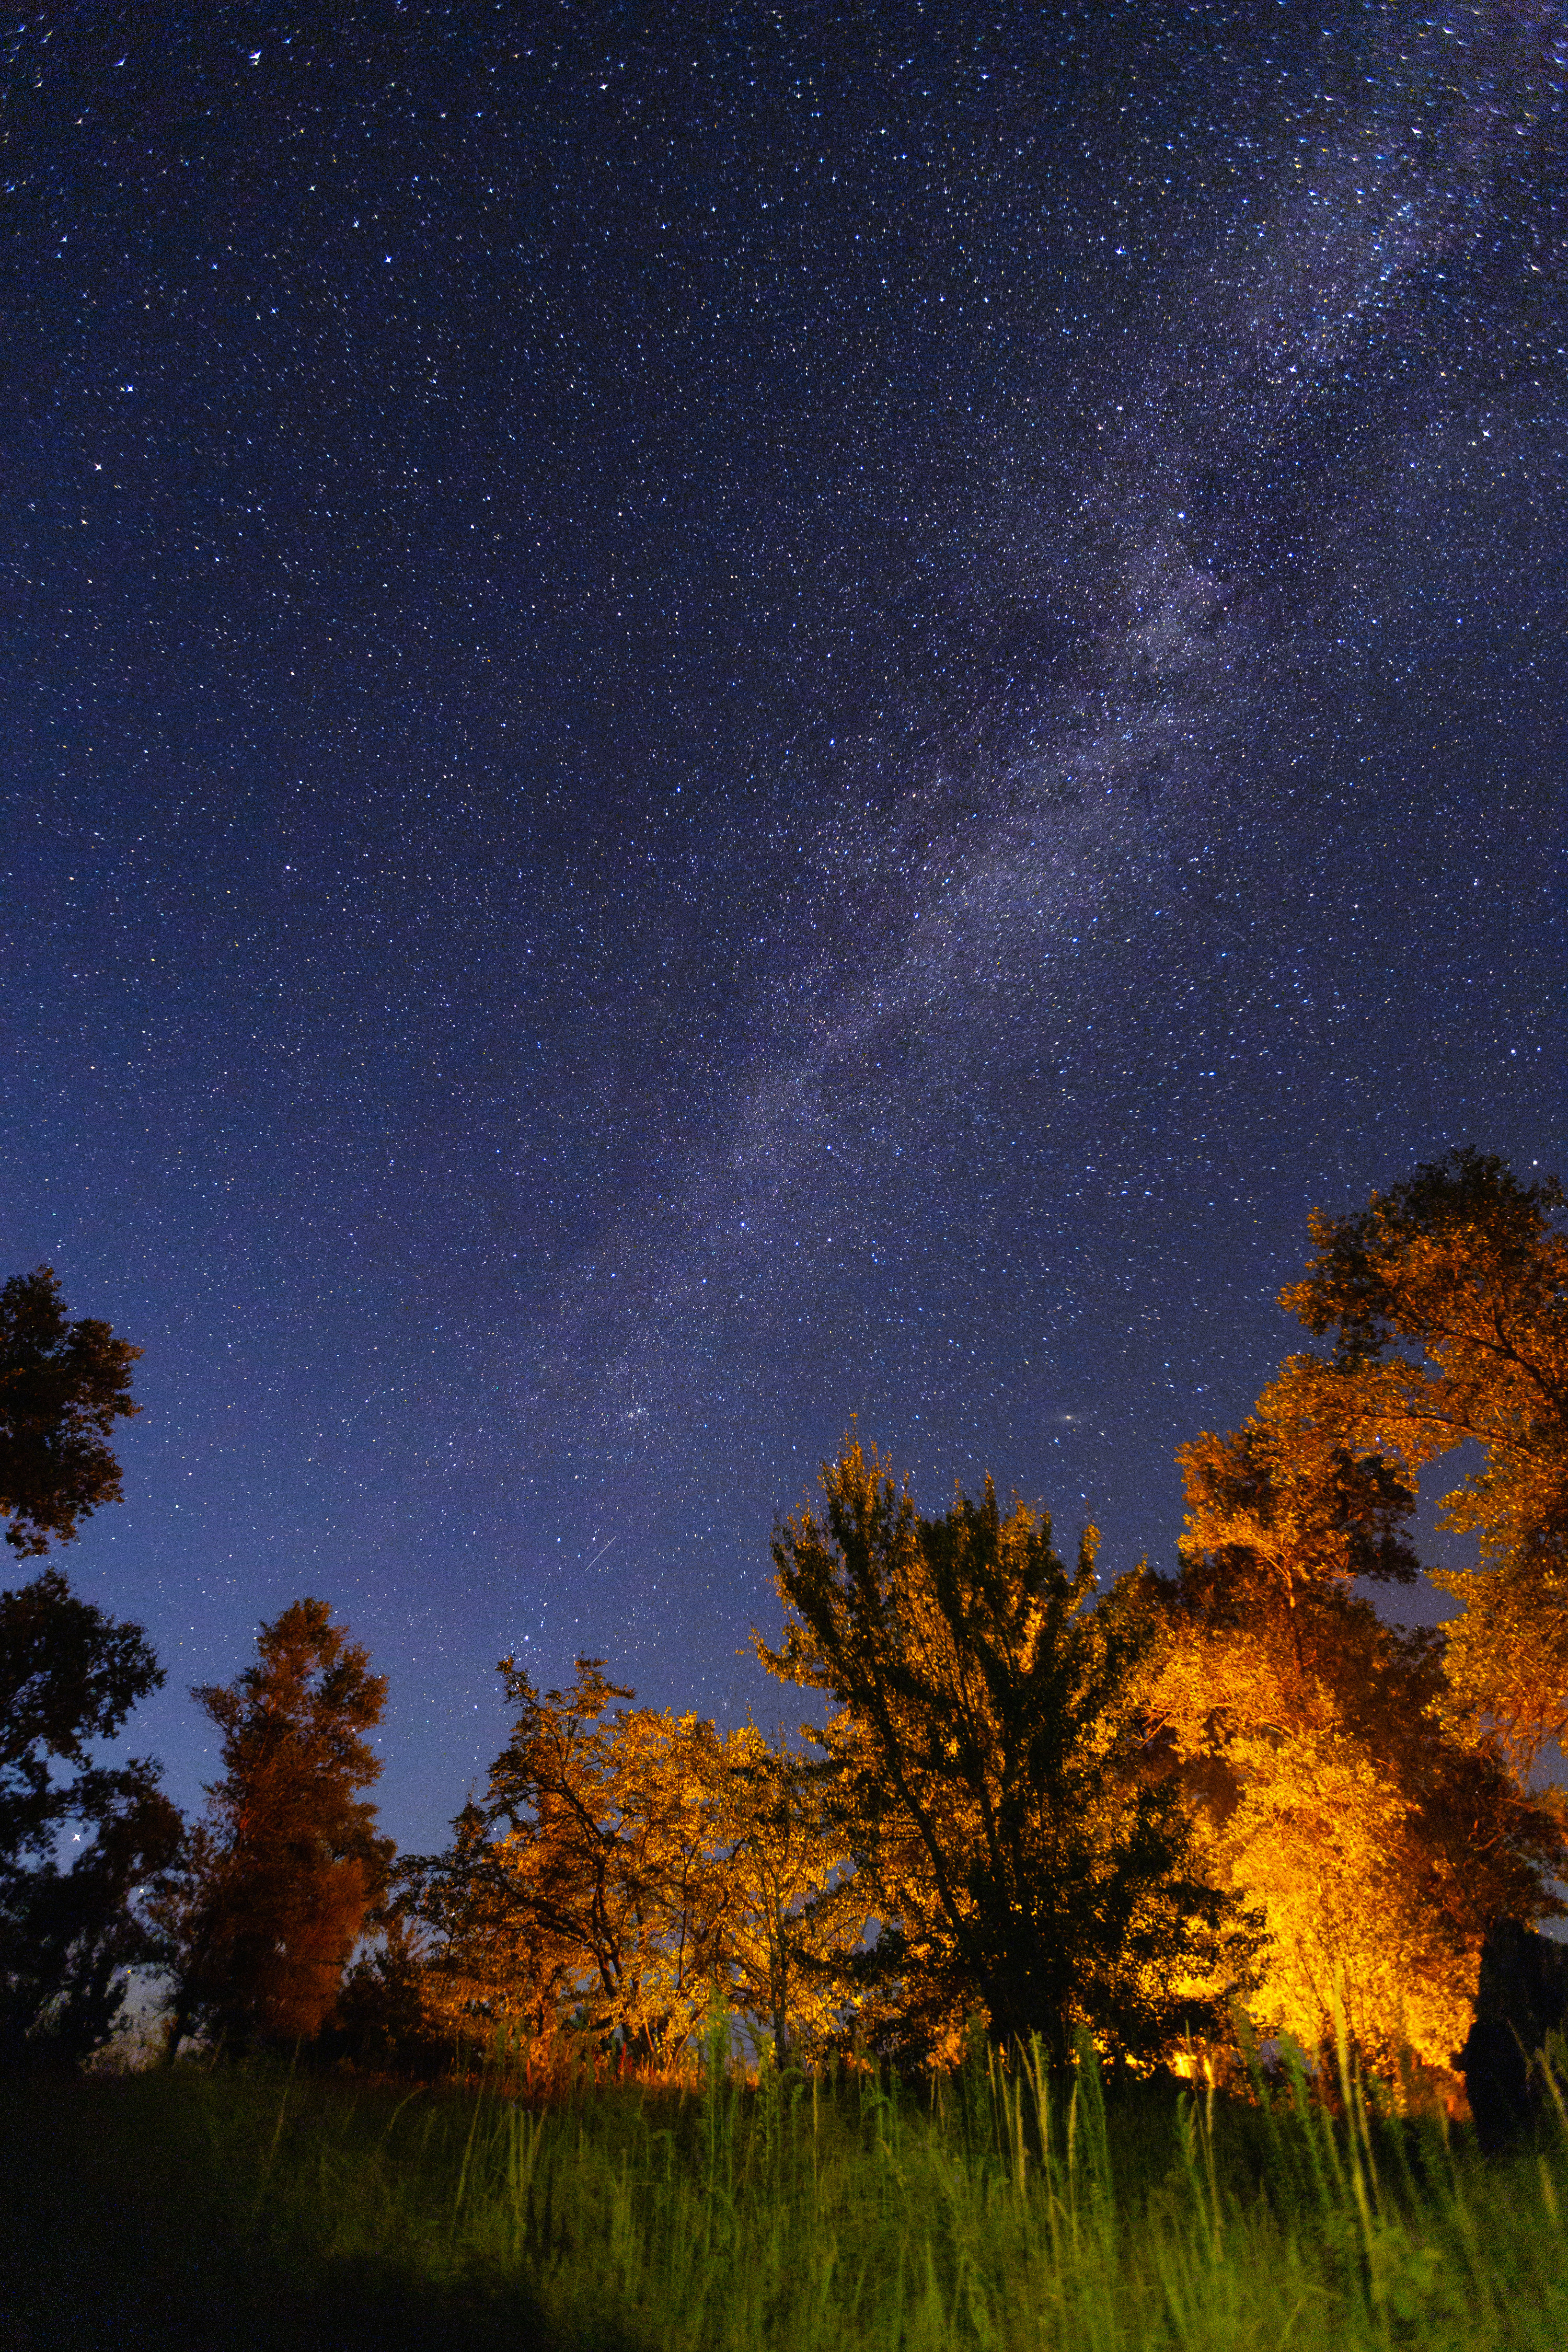 Country landscape at night with trees illuminated by a campsite, lots of stars and the Milky Way is visible above